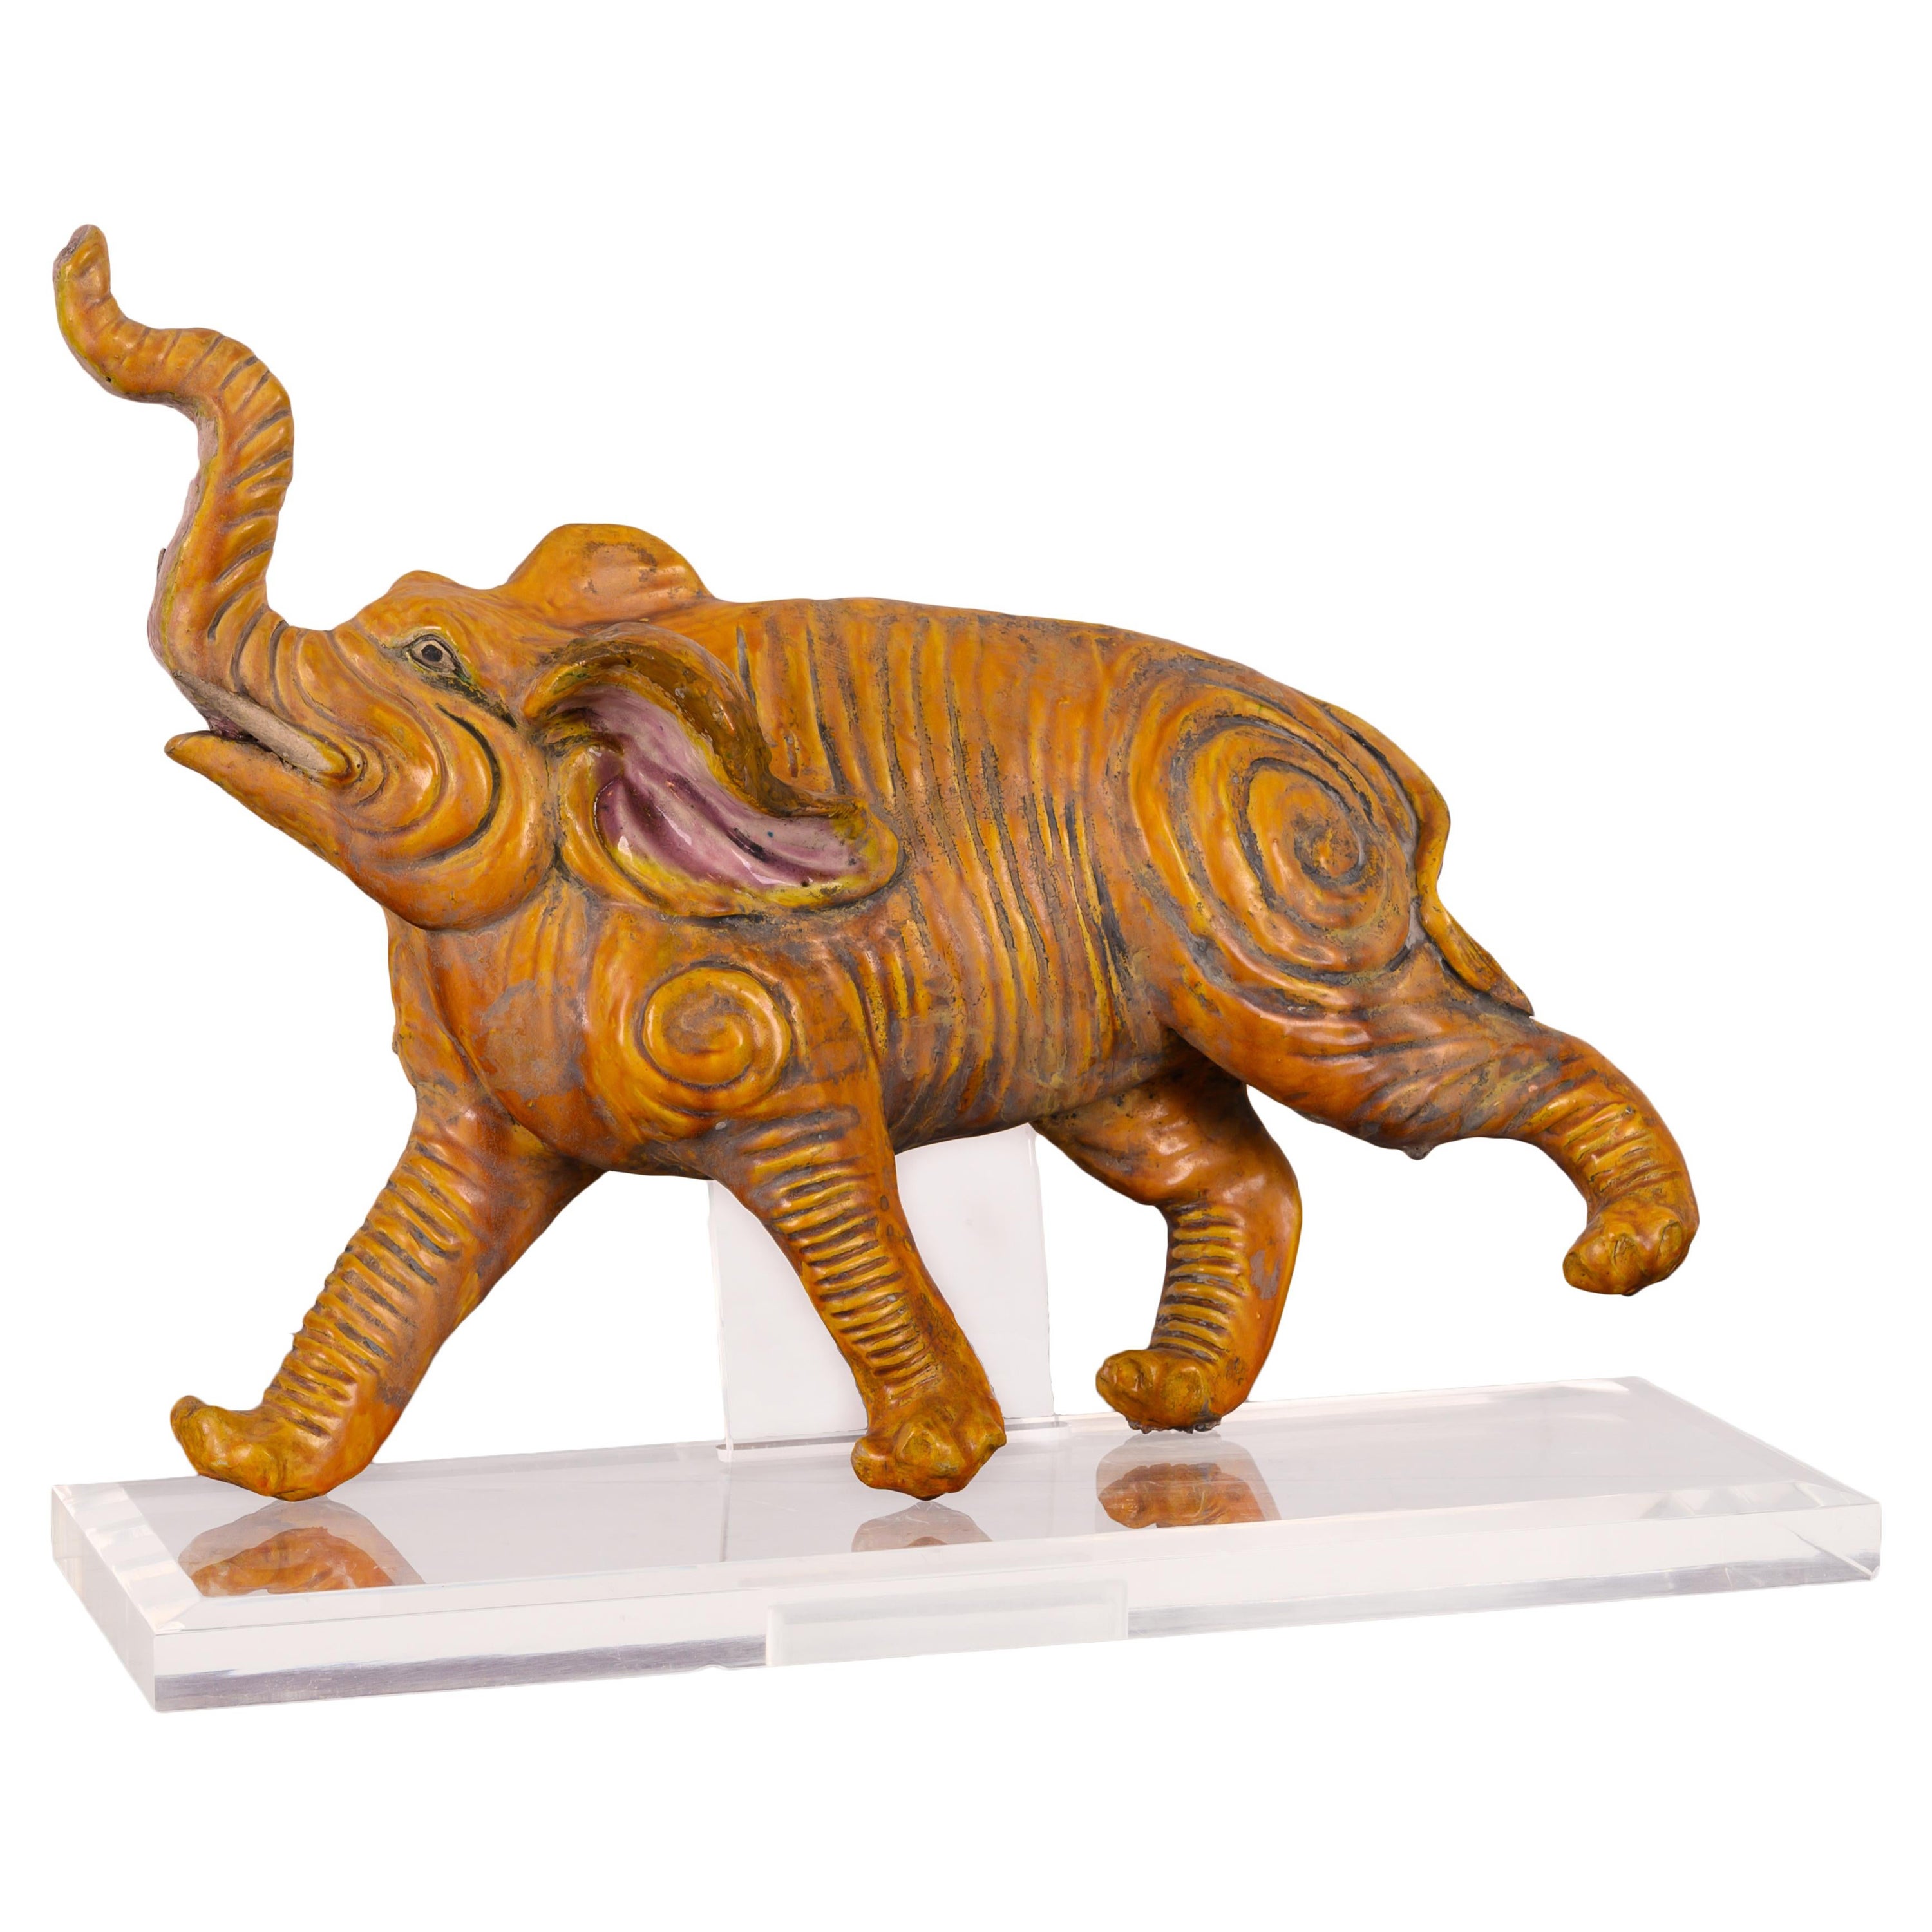 Chinese Elephant Roof Tile, 19th Century Regular price For Sale